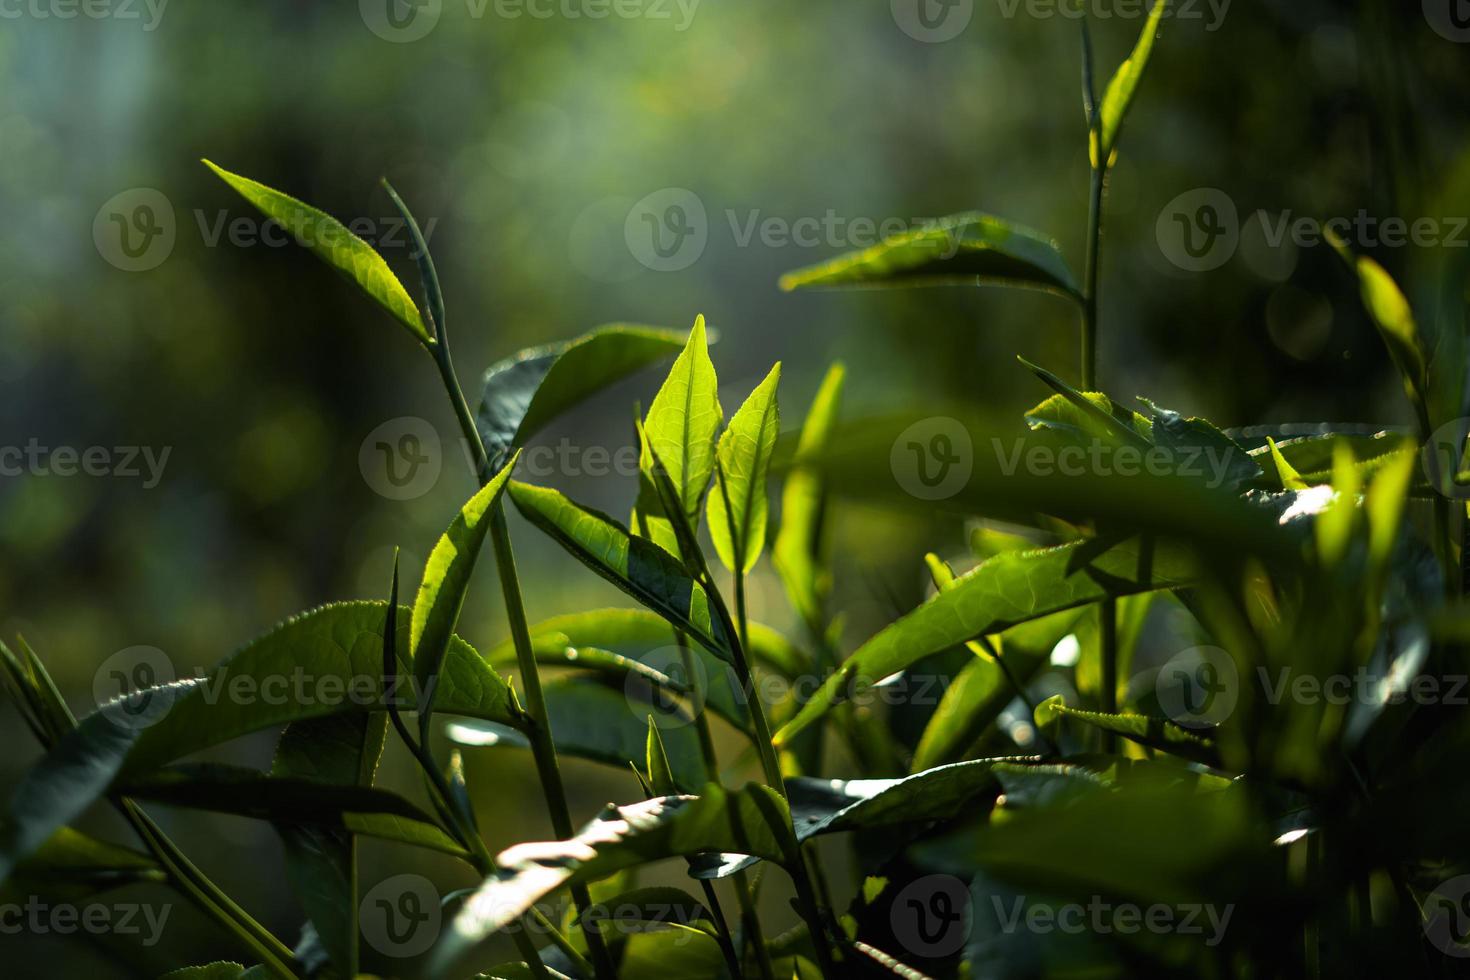 green tea leaves in nature evening light photo